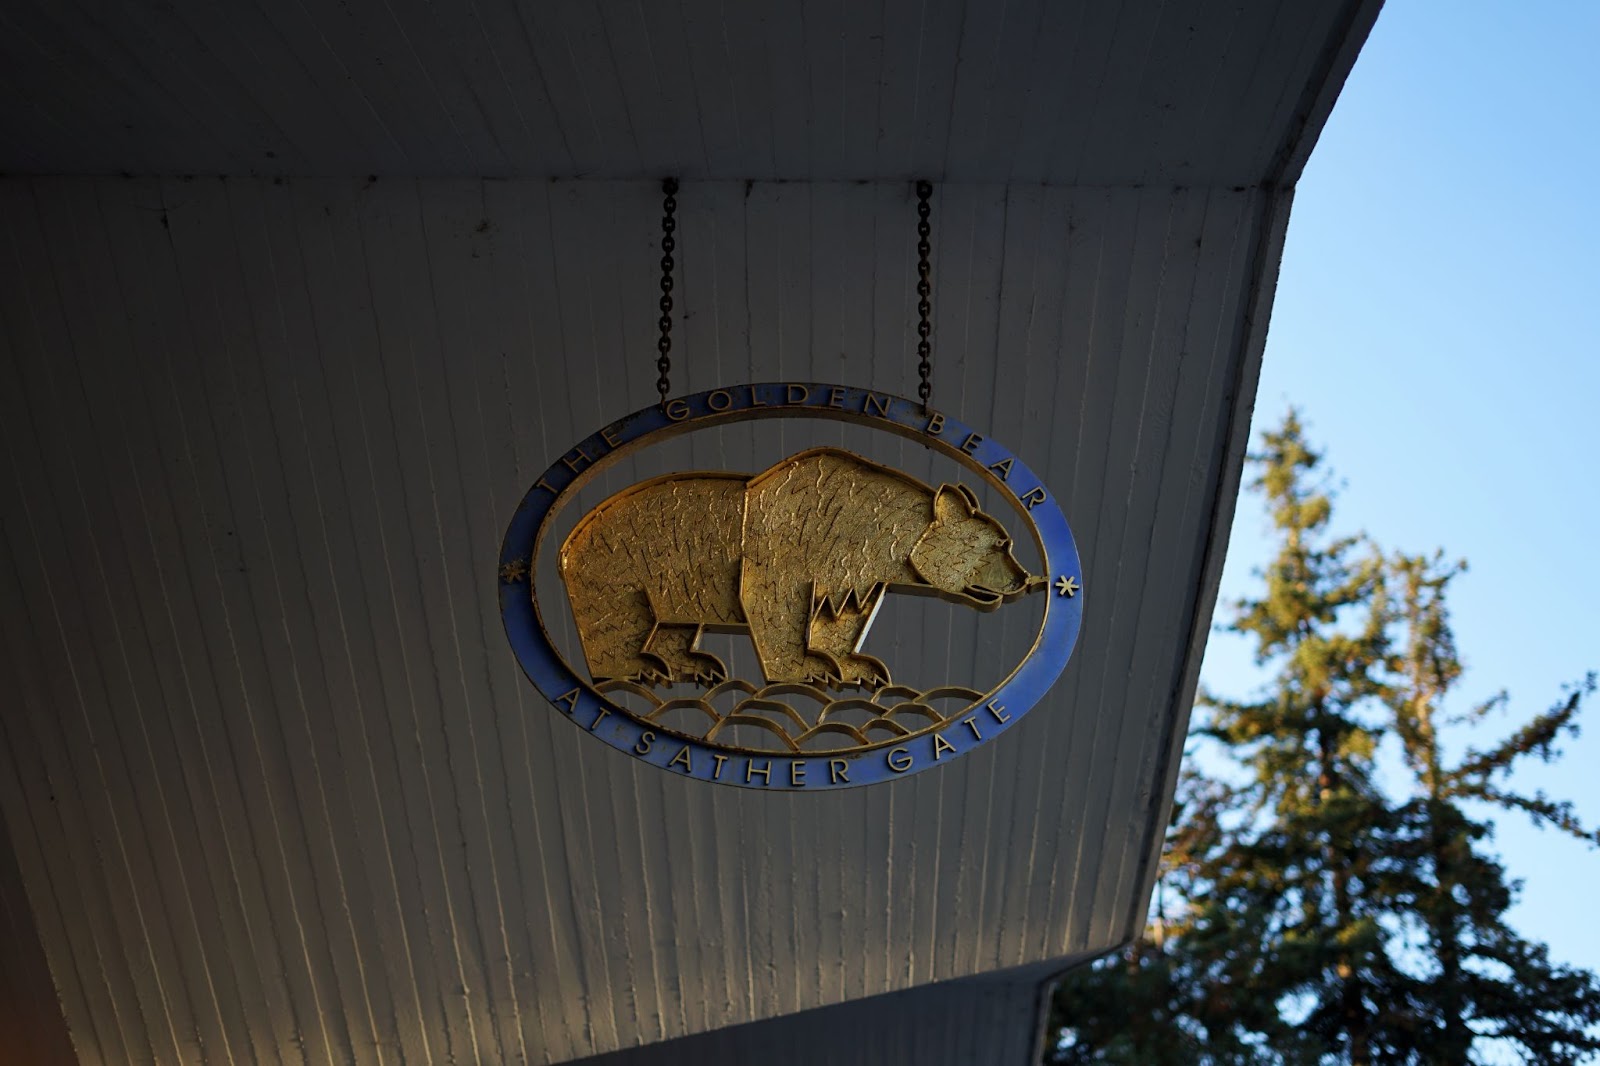 A hanging sign which reads "THE GOLDEN BEAR AT SATHER GATE" and has a bear in the center with golden detailing. 